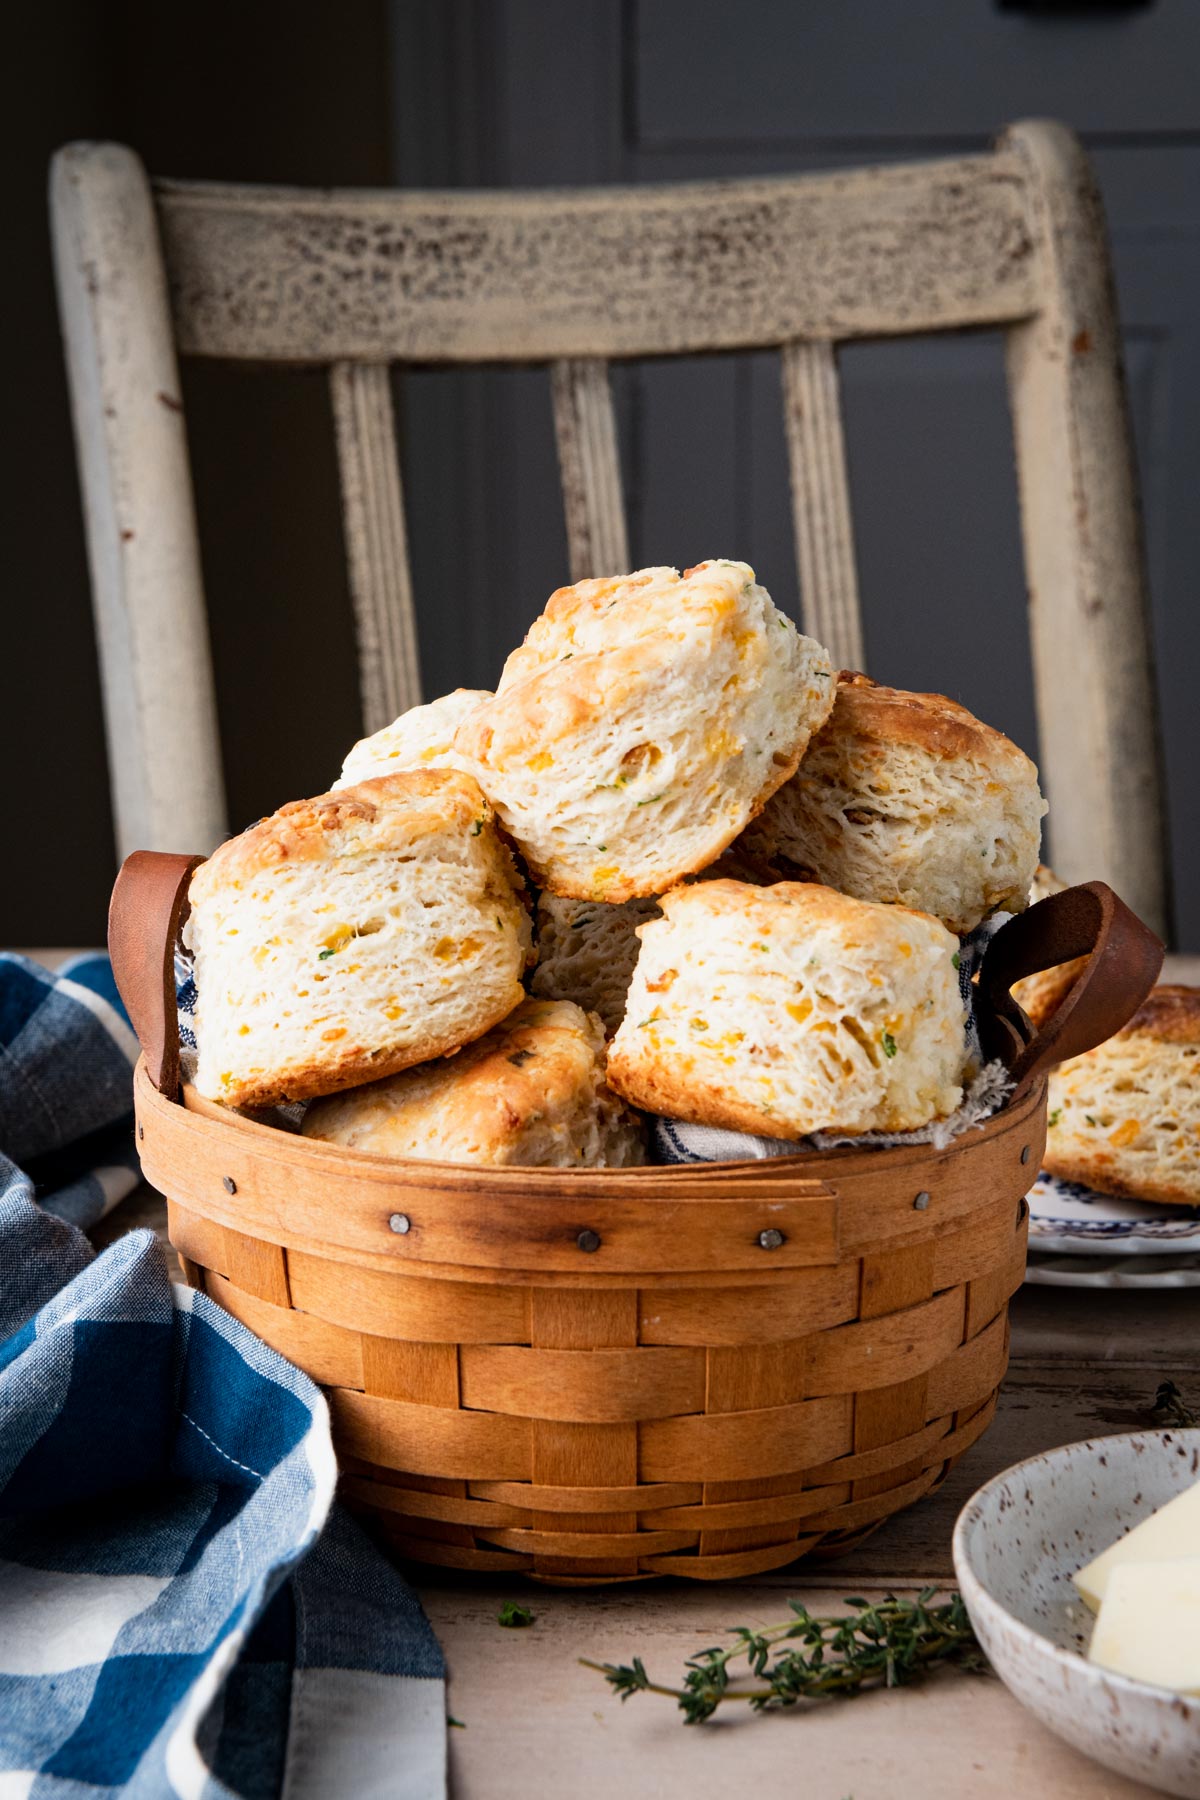 Cheddar biscuits with chives and bacon in a basket on a breakfast table